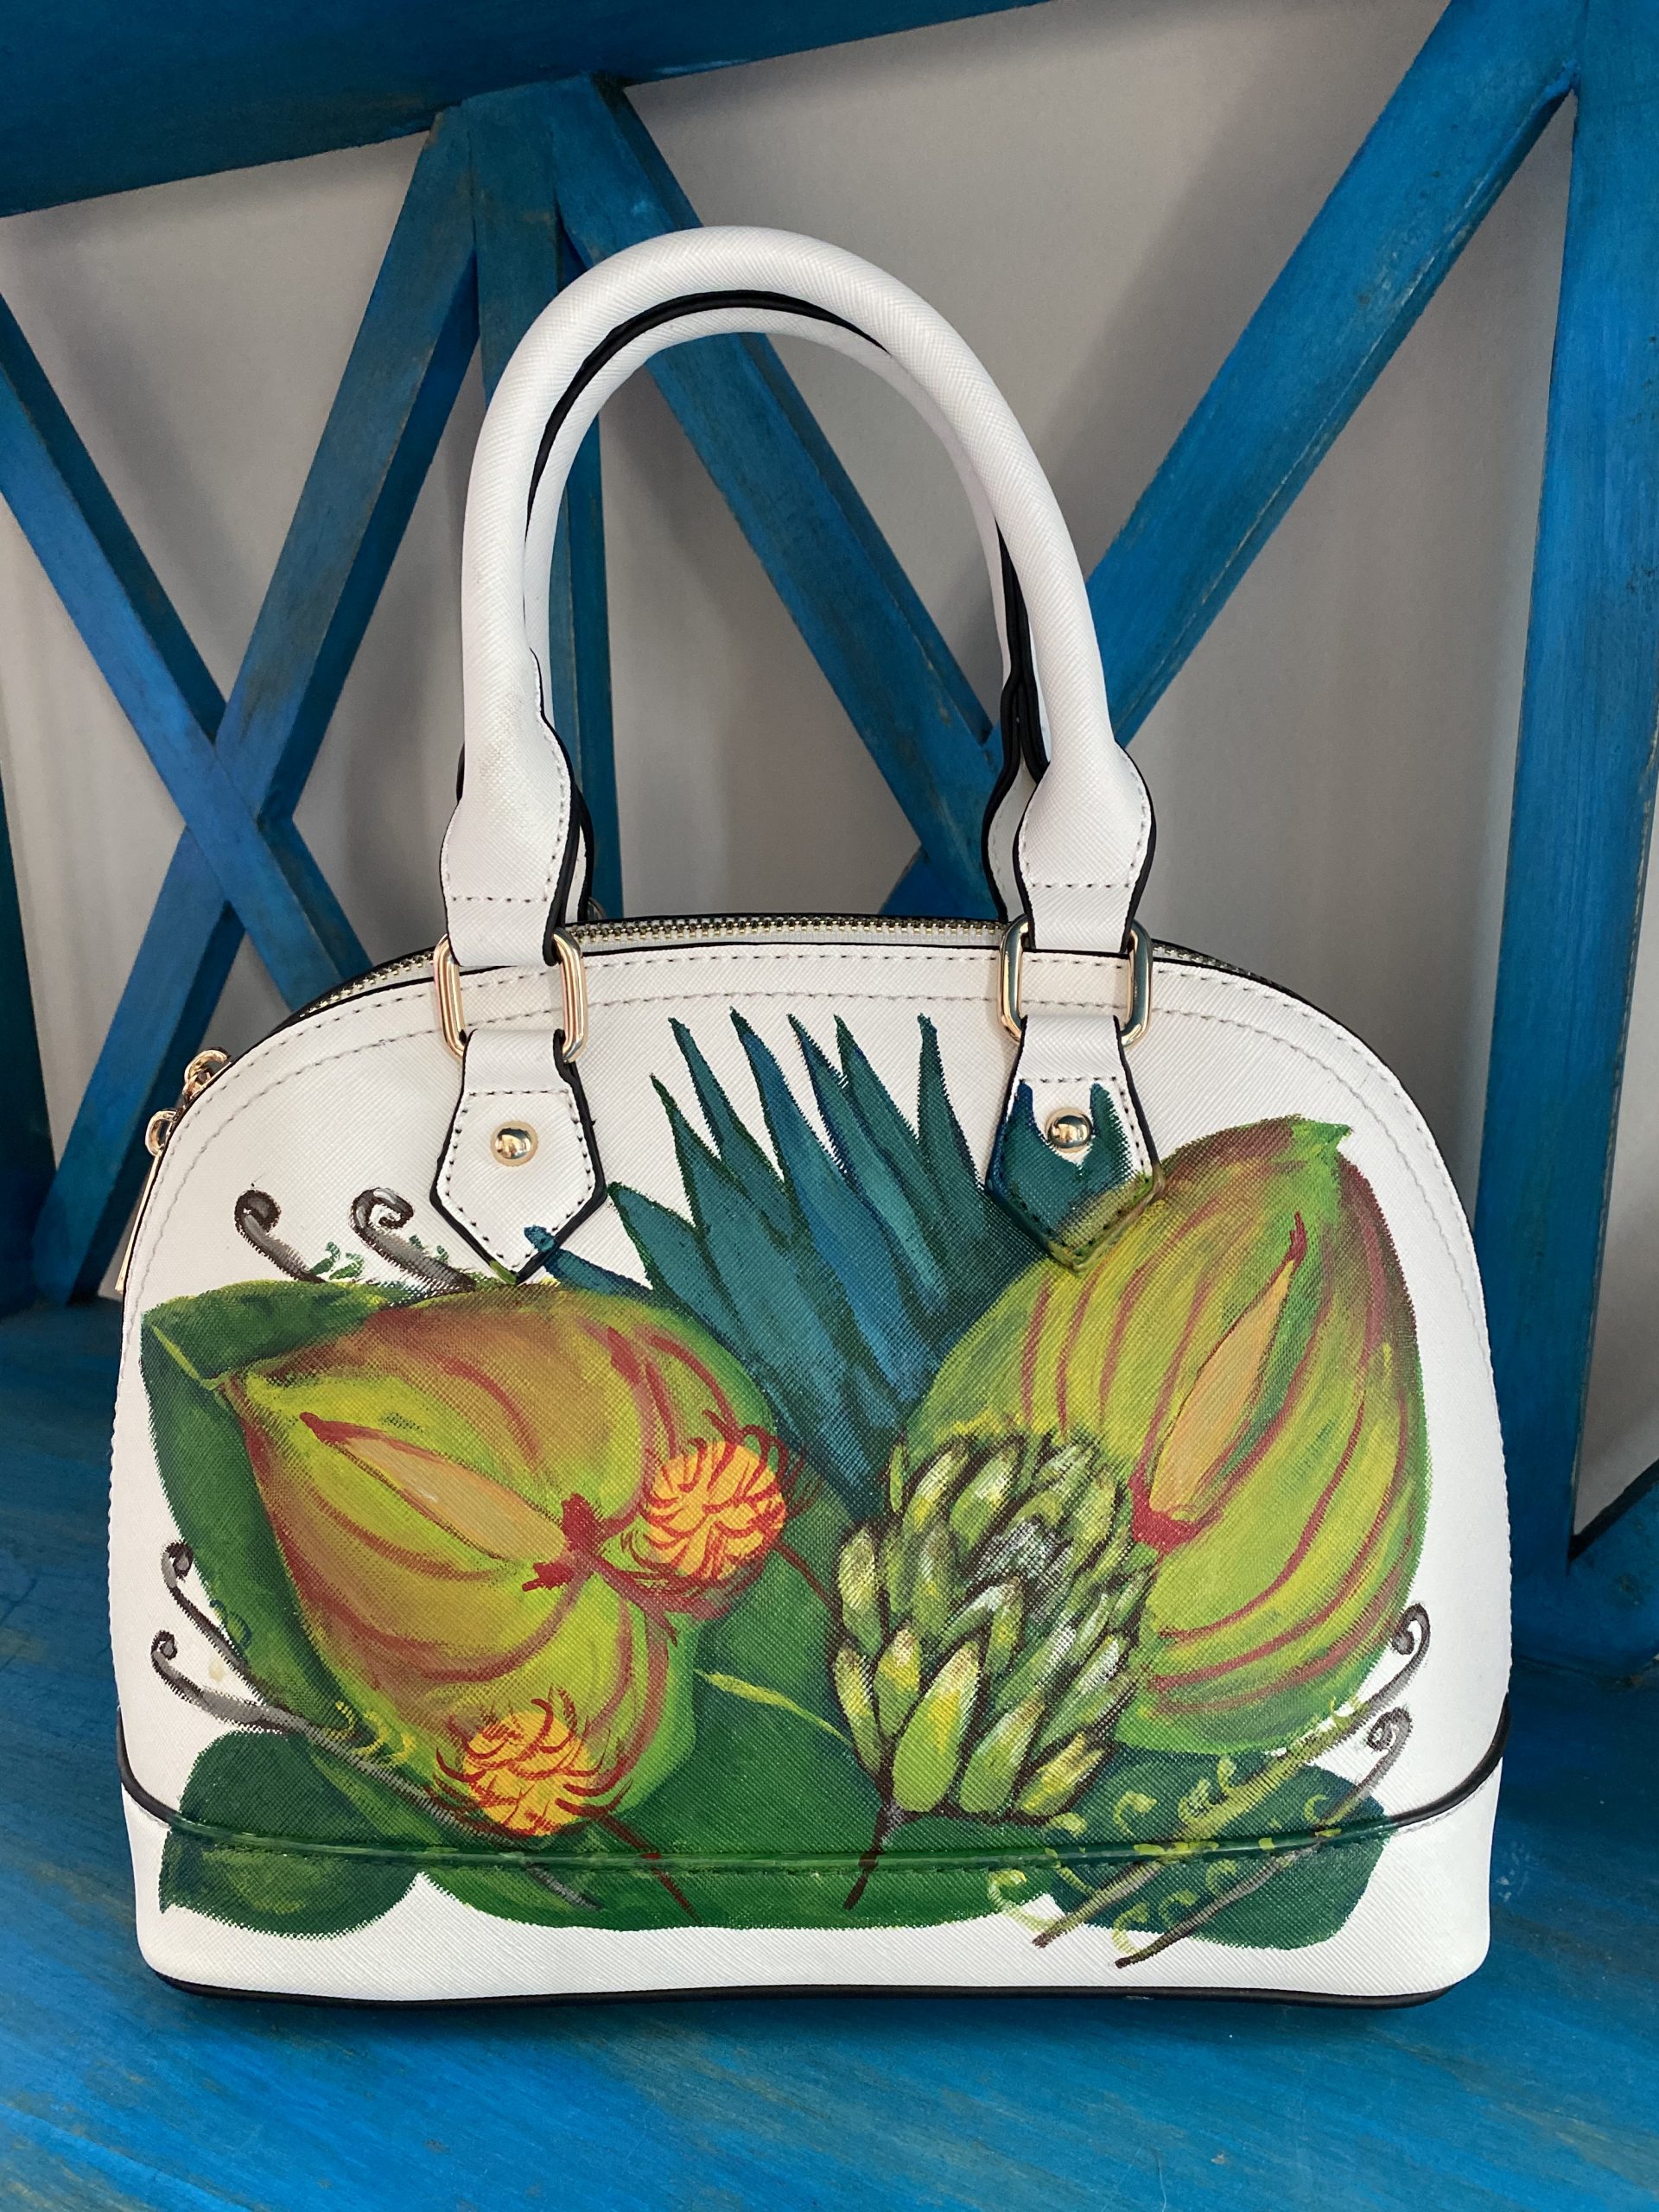 Artisanal Delights: Painted Leather Bags And Purses Painted, 43% OFF